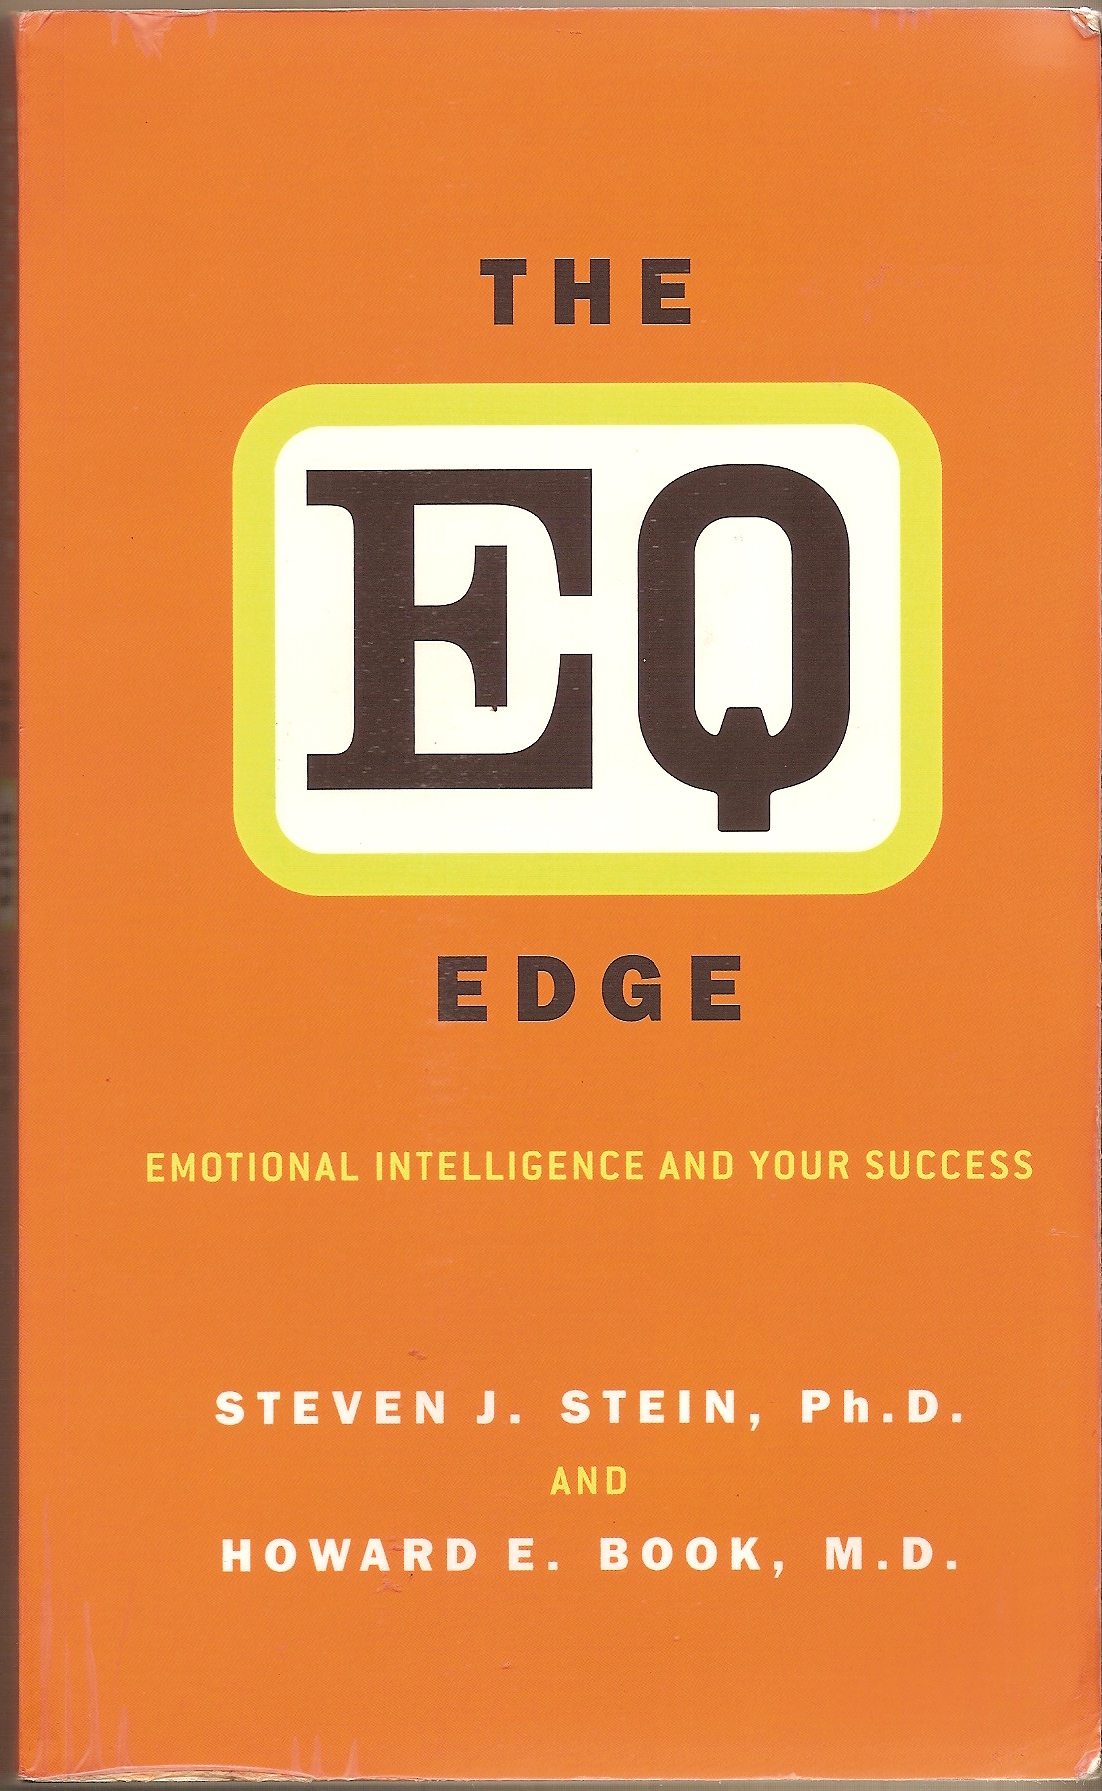 STEIN, STEVEN J. & HOWARD E., M.D. BOOK - E Q Edge, the Emotional Intelligence and Your Success